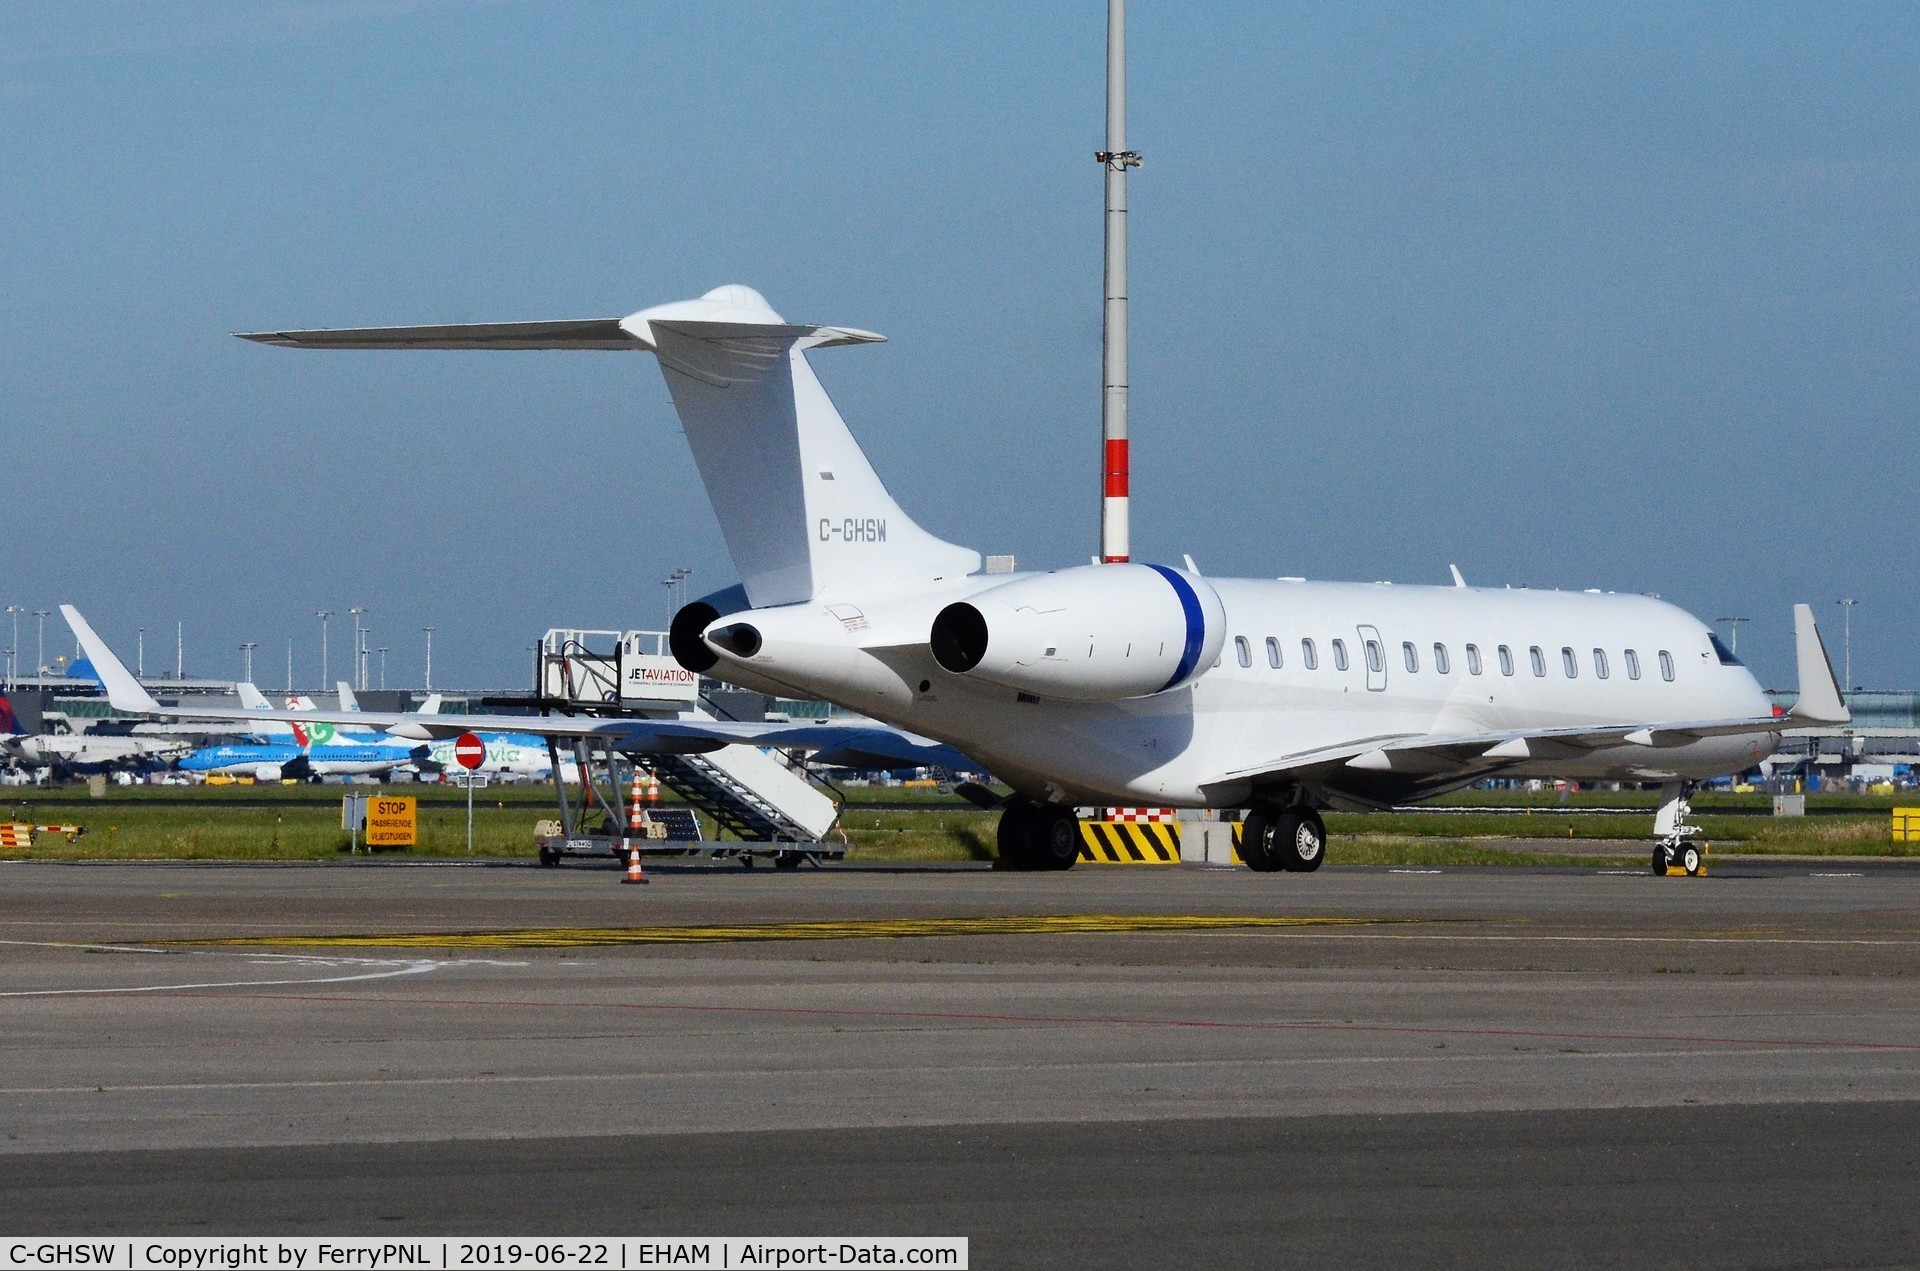 C-GHSW, 2014 Bombardier BD700-1A10 Global 6000 C/N 9640, Global 6000 on the ramp at AMS